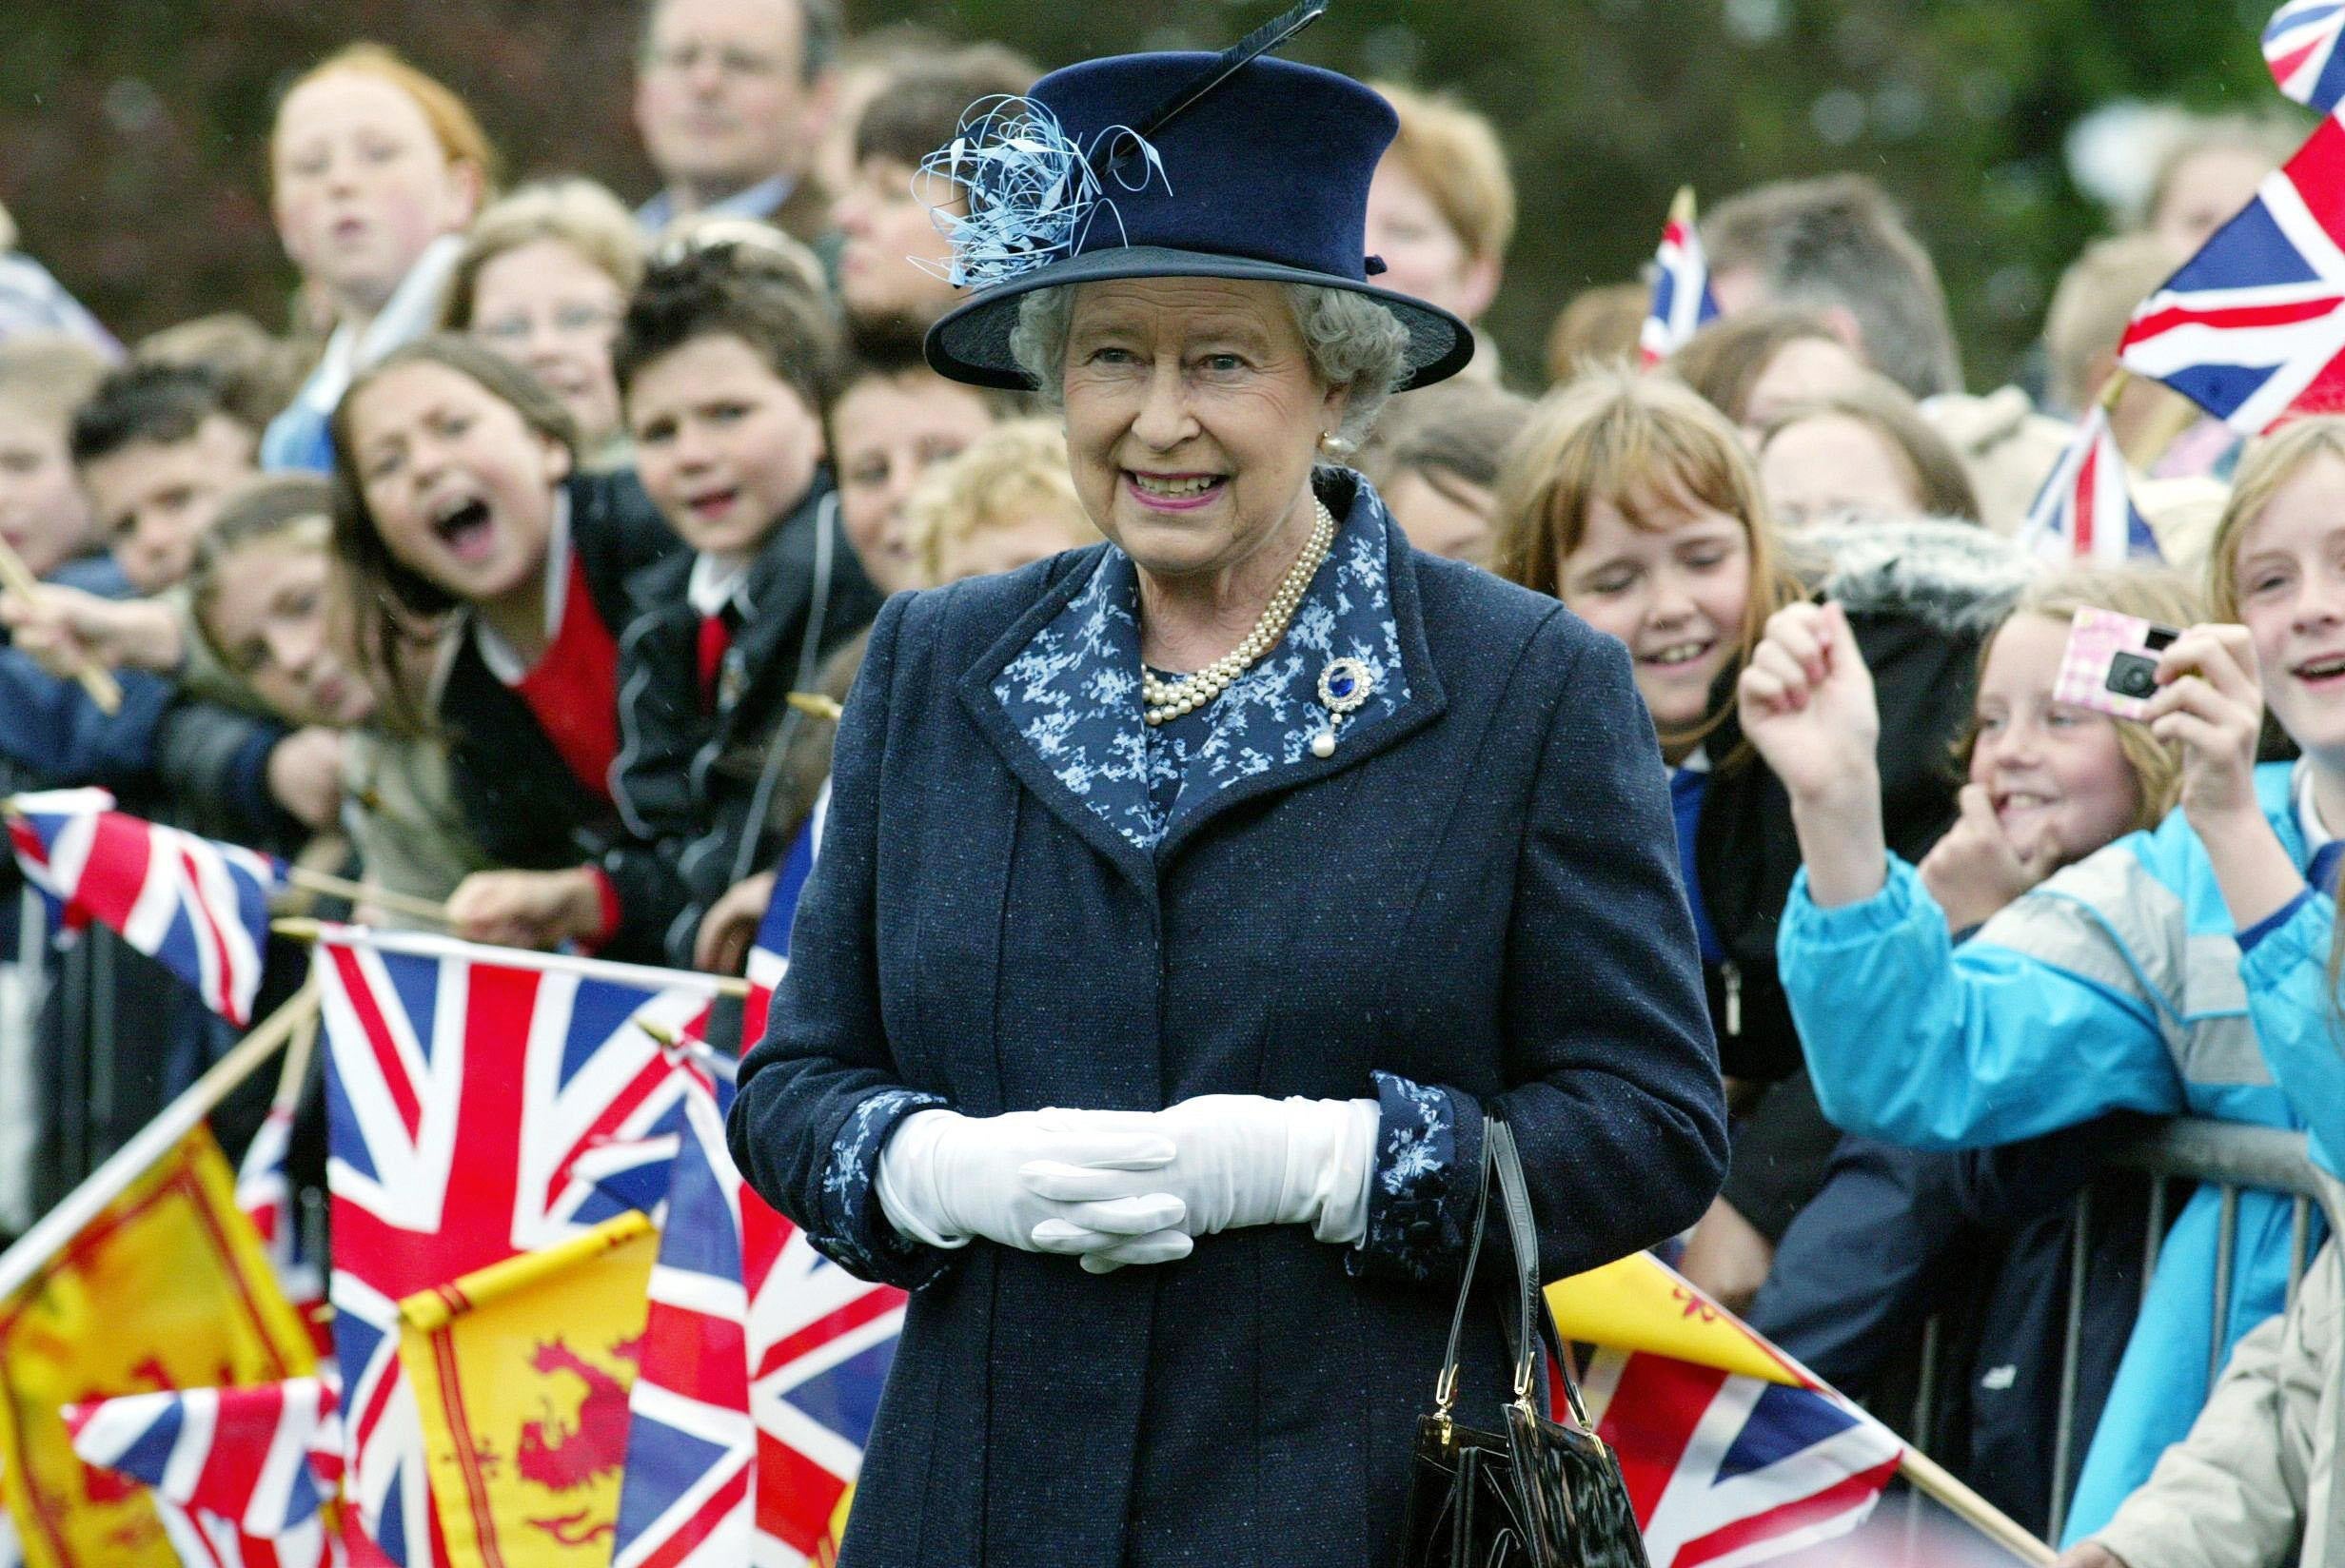 The Queen during a previous visit to Dunfermline. (Andrew Parsons/PA)